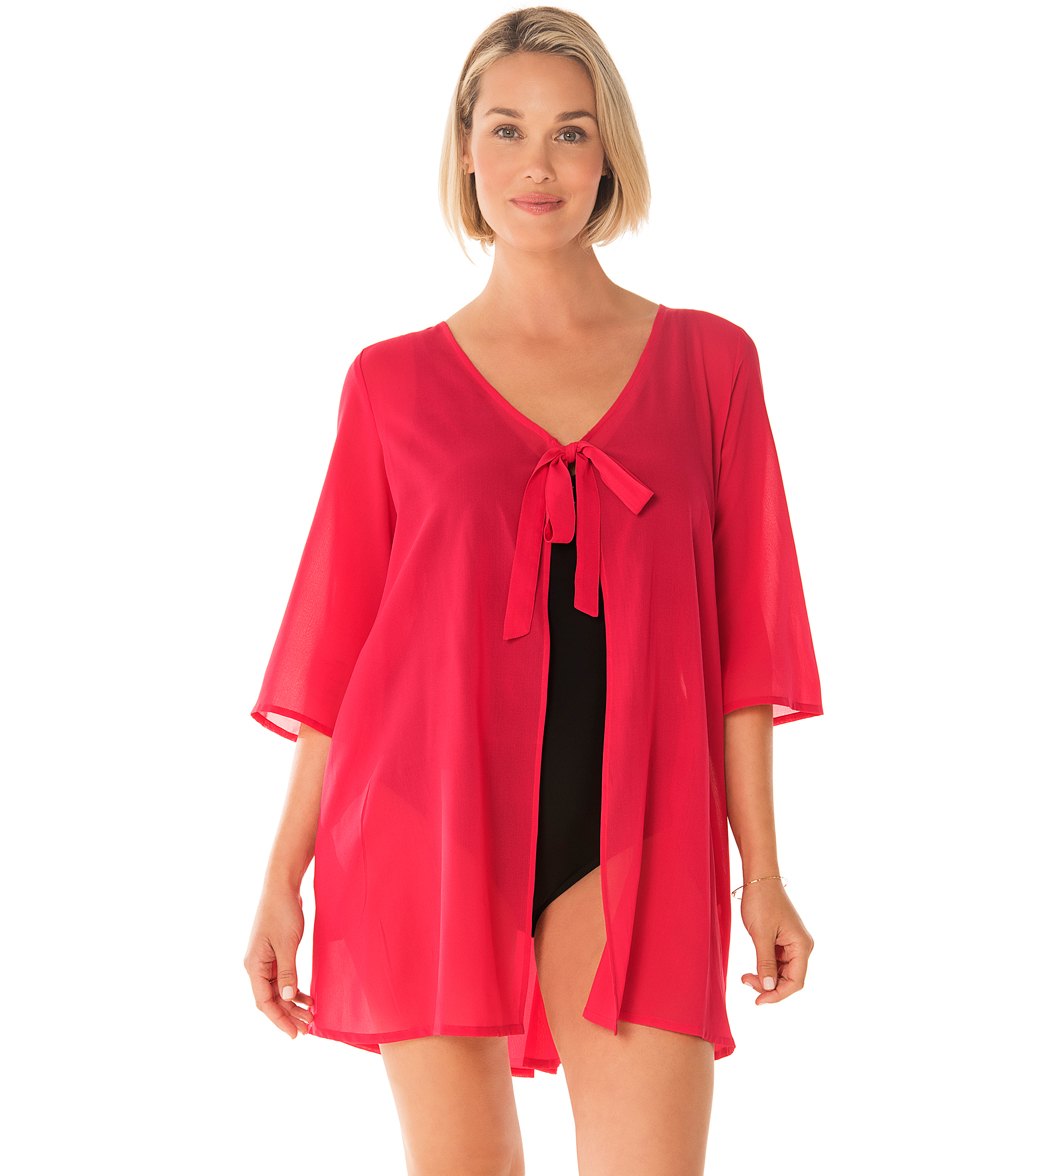 Penbrooke Take Cover Poly Georgette Tie Front Up Dress - Fuchsia Pink Medium Polyester - Swimoutlet.com